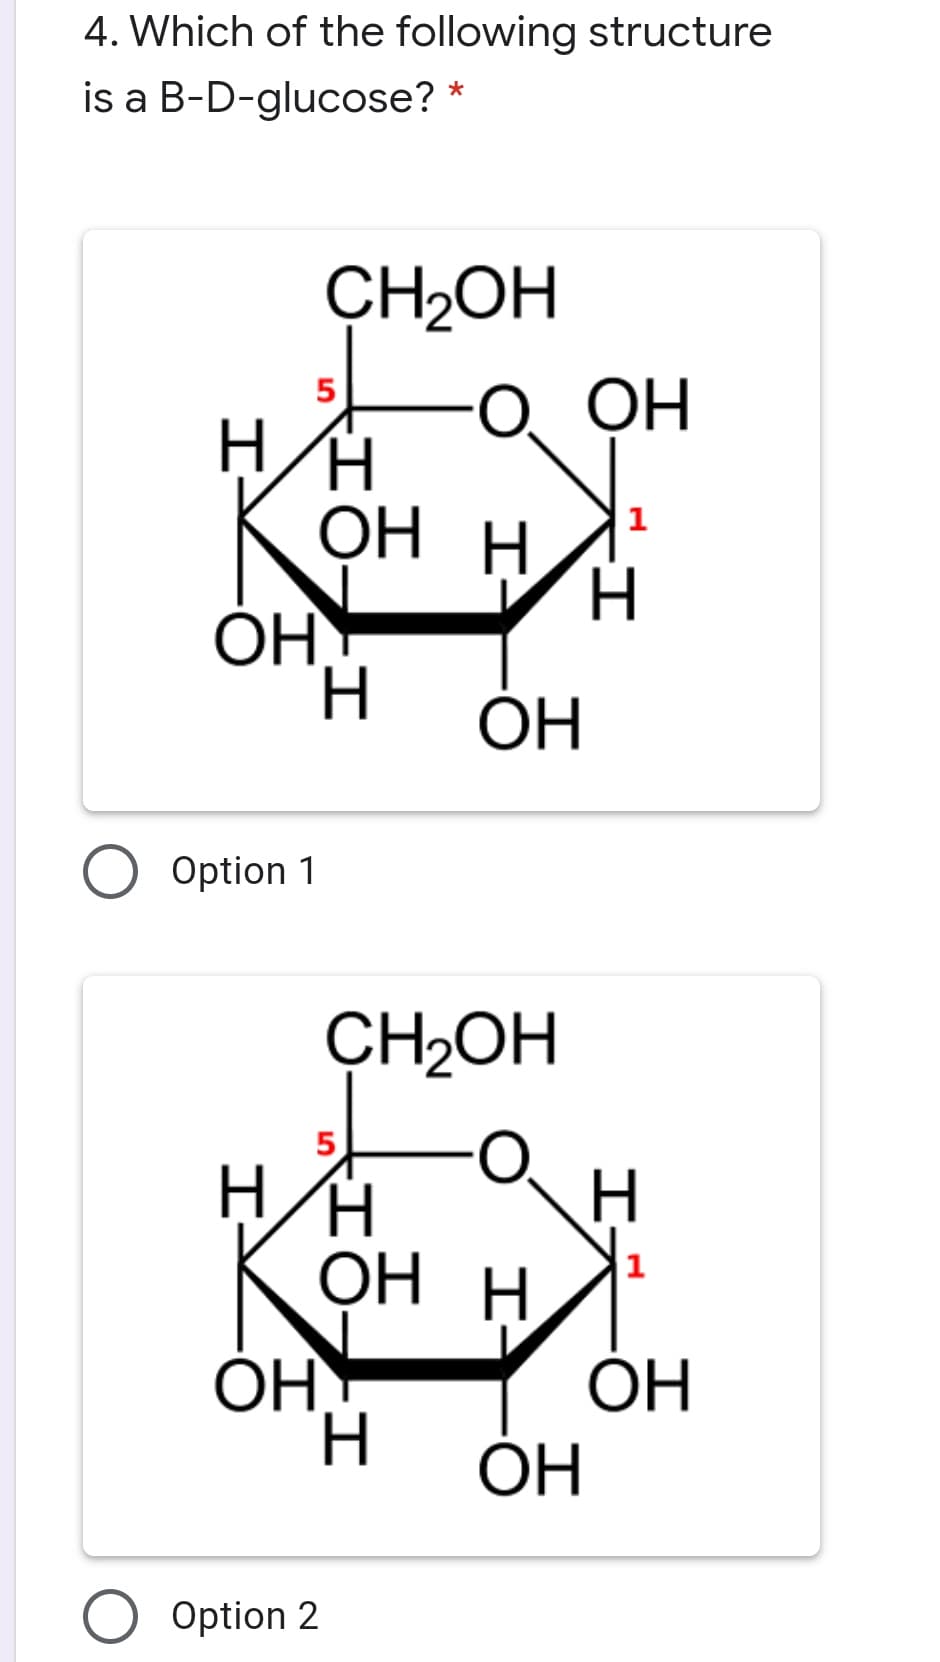 4. Which of the following structure
is a B-D-glucose?
ÇH2OH
О Он
ОН Н
1
H.
ОН
Option 1
CH2OH
OH
ОН Н
1
OH
ОН
H.
ОН
ОН
Option 2
